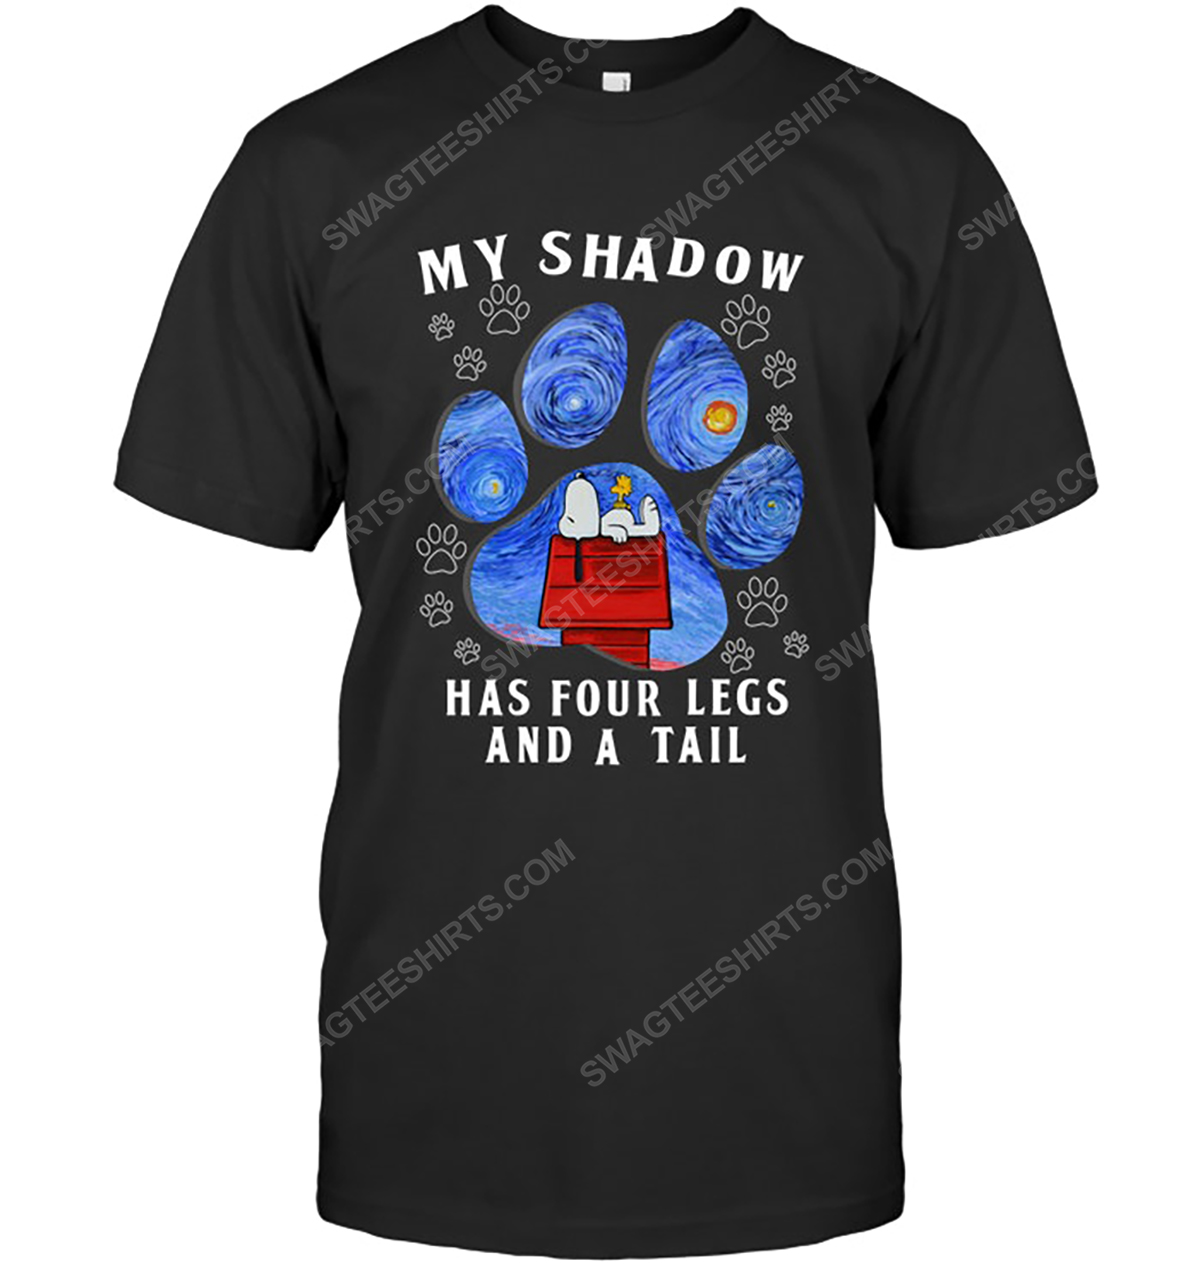 The starry night snoopy my shadow has 4 legs and a tail tshirt 1